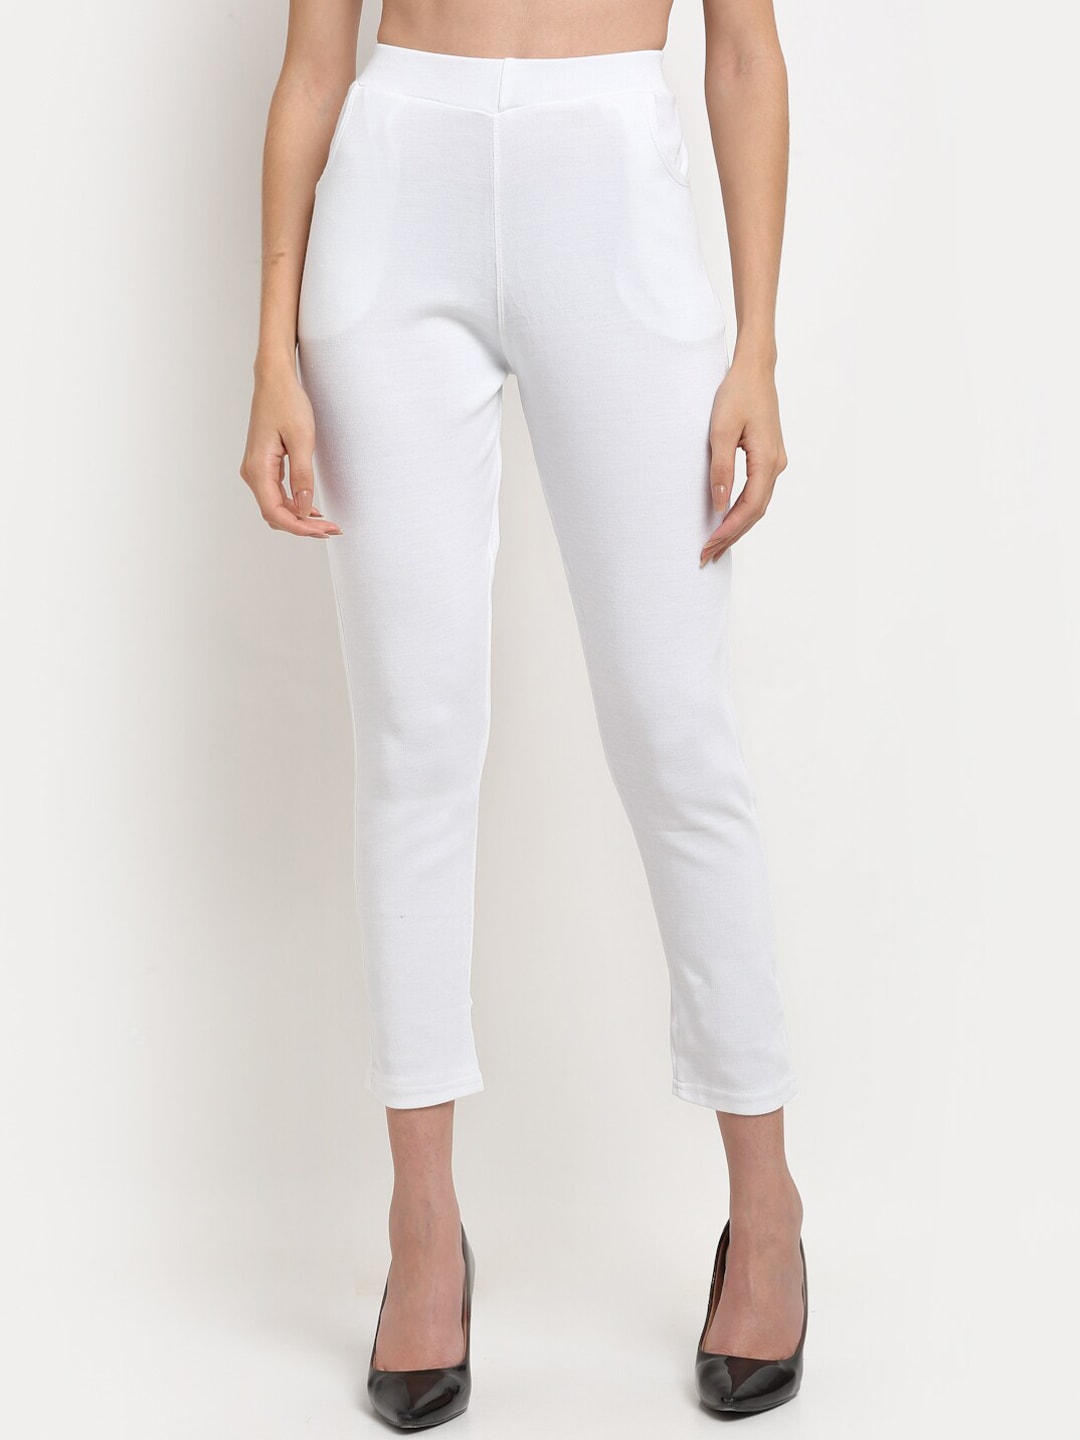 TAG 7 Women White Solid Ankle Length Leggings Pants Price in India